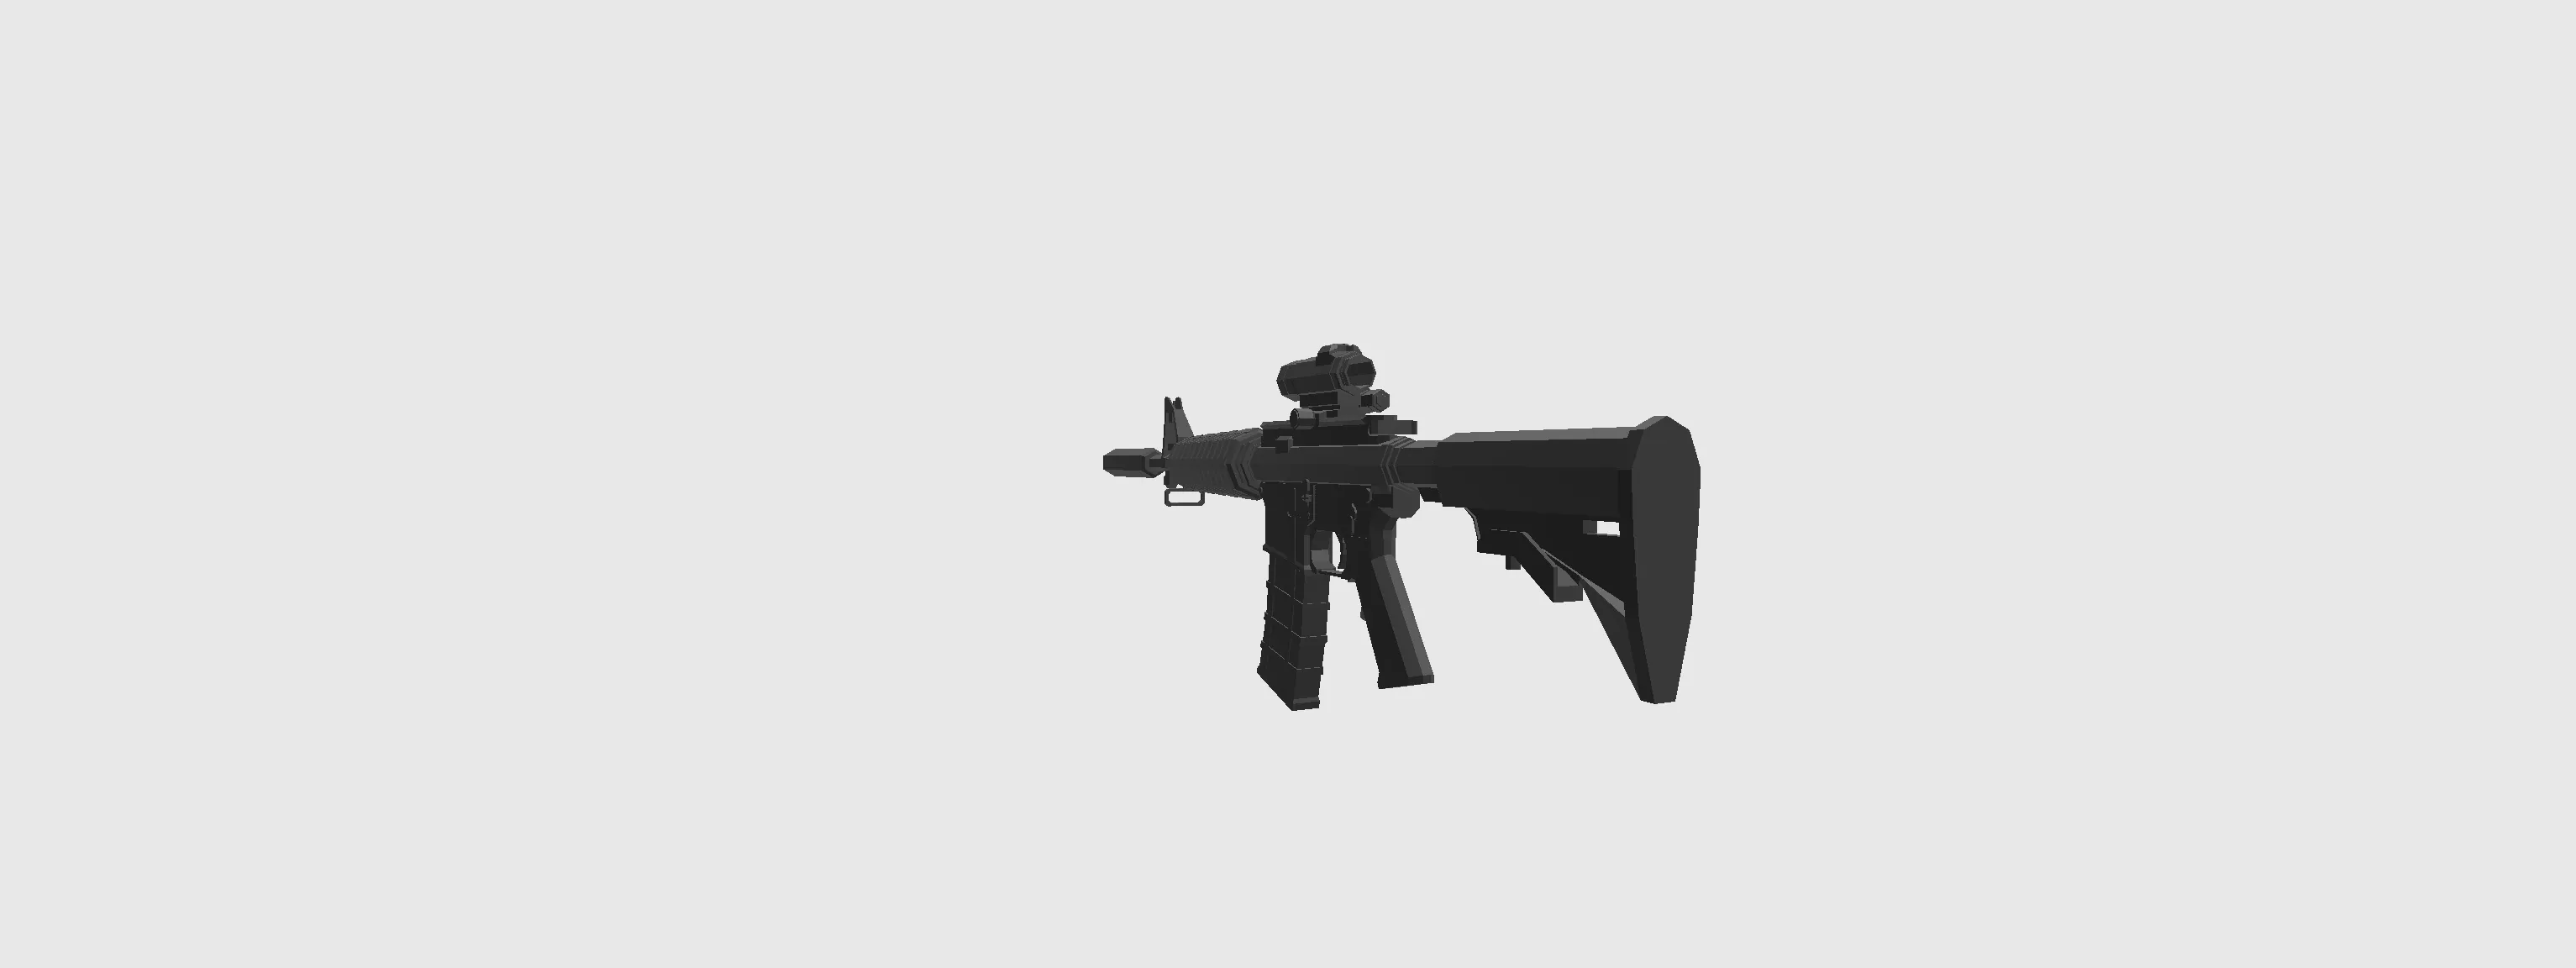 low poly m4 rifle